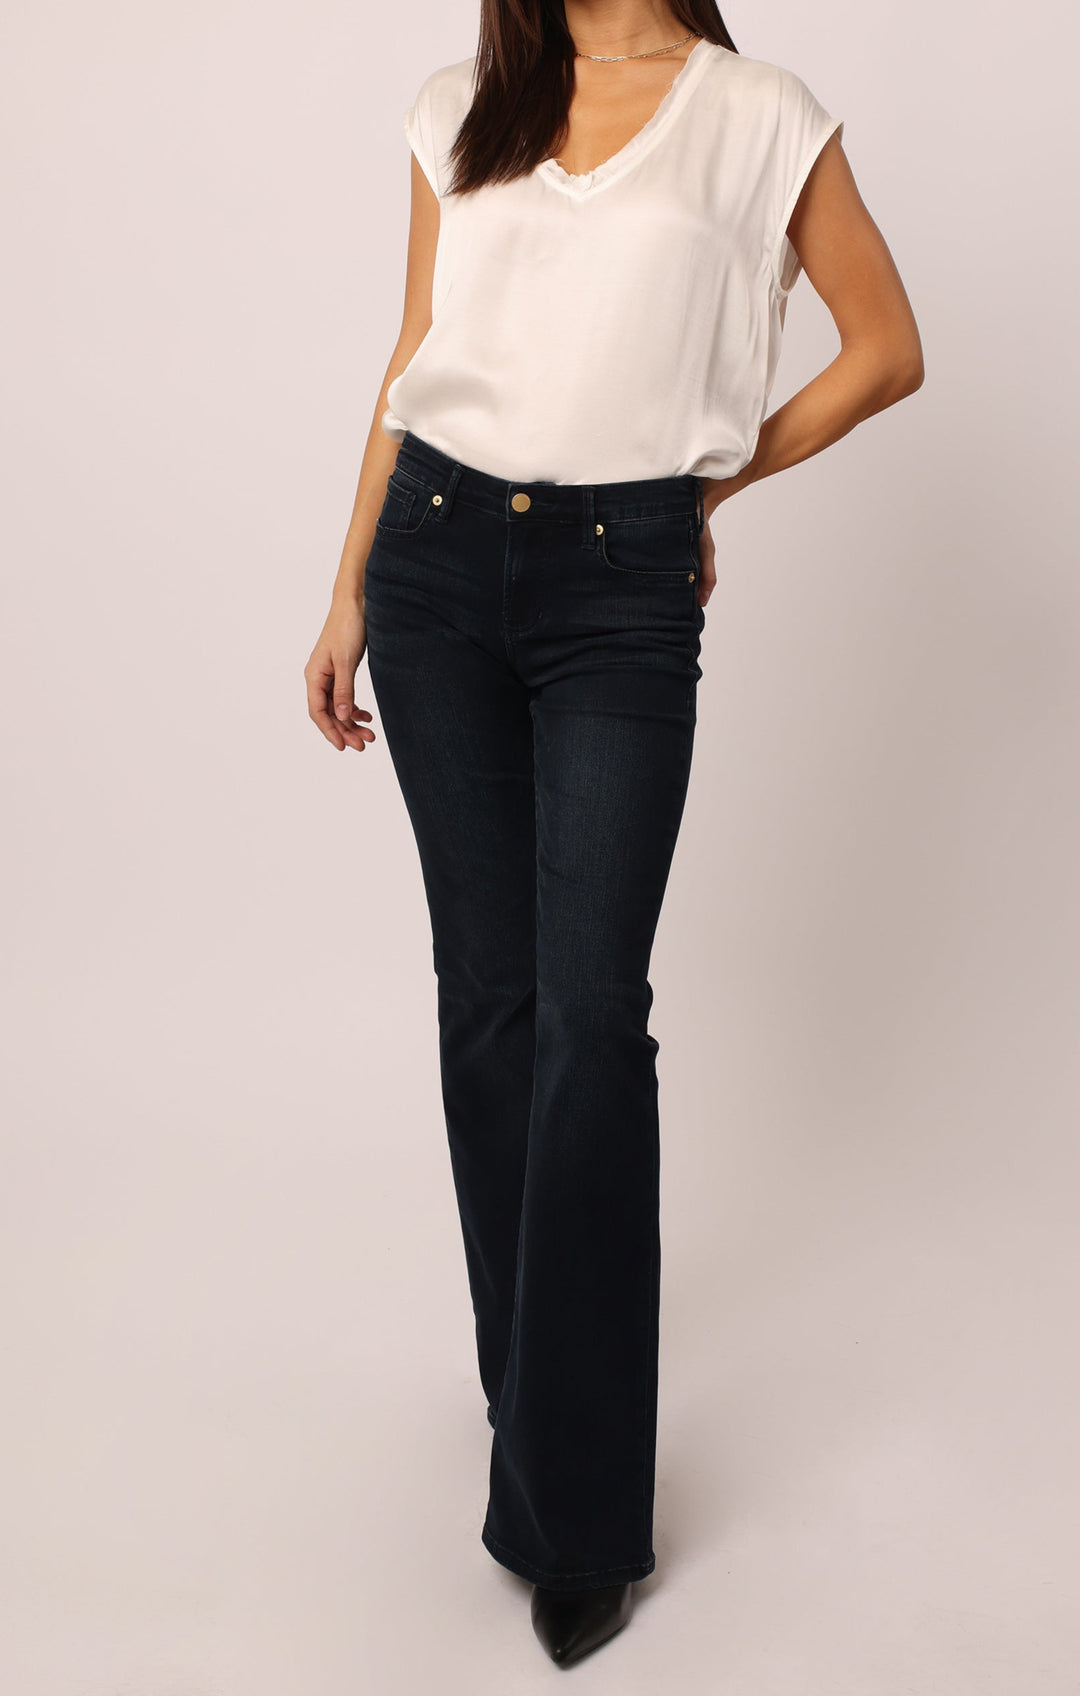 What to wear with flared jeans - Cheryl Shops